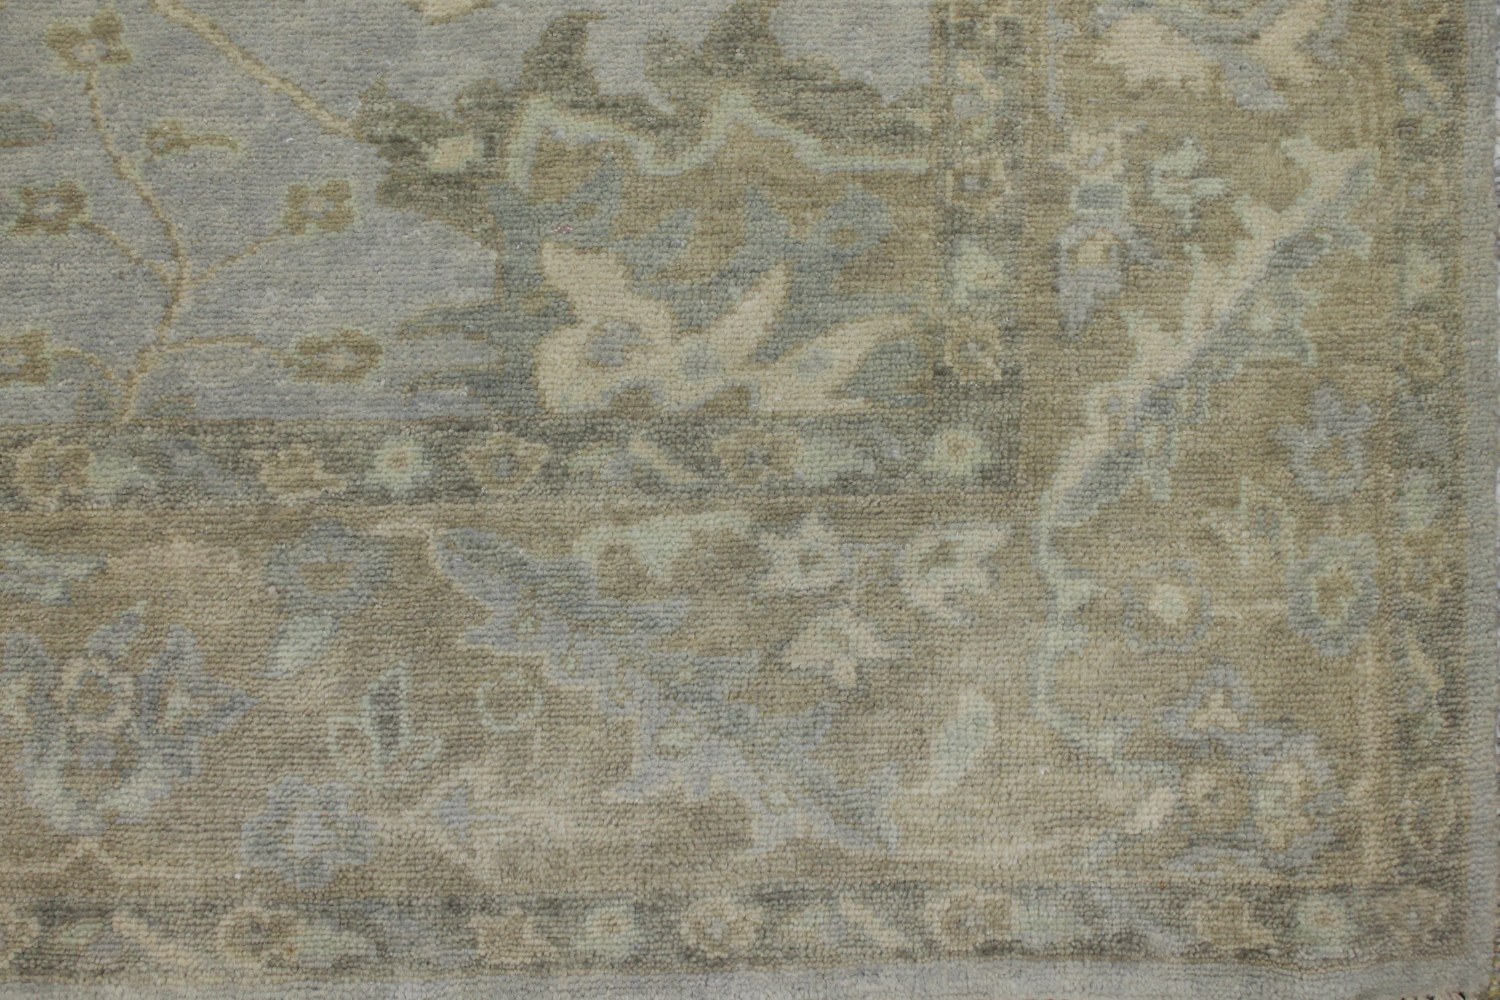 6x9 Oushak Hand Knotted Wool Area Rug - MR19763